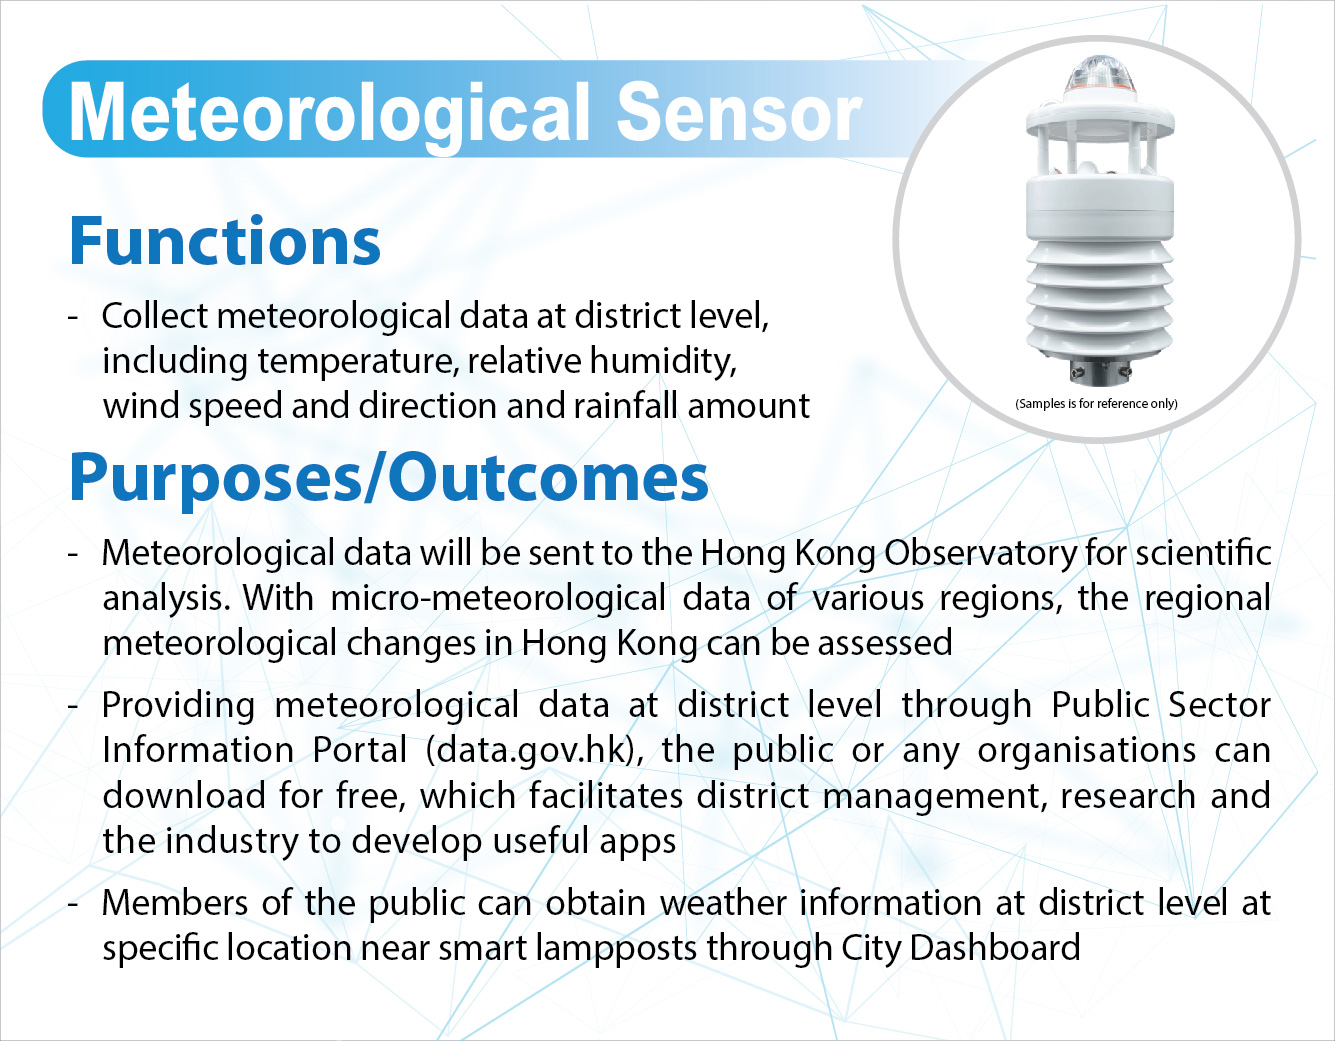 Meteorological Sensor,
					Functions
					Collect meteorological data at district level including temperature and relative humidity.

					Purposes/Outcomes -
					Meteorological data will be sent to the Hong Kong Observatory for scientific analysis. With micro-meteorological data of various regions, the regional meteorological changes in Hong Kong can be assessed.
					Providing meteorological data at district level through Public Sector Information Portal (data.gov.hk), the public or any organisations can download for free, which facilitates district management, research and the industry to develop useful apps.
					Members of the public can obtain weather information at district level at specific location near smart lampposts through City Dashboard